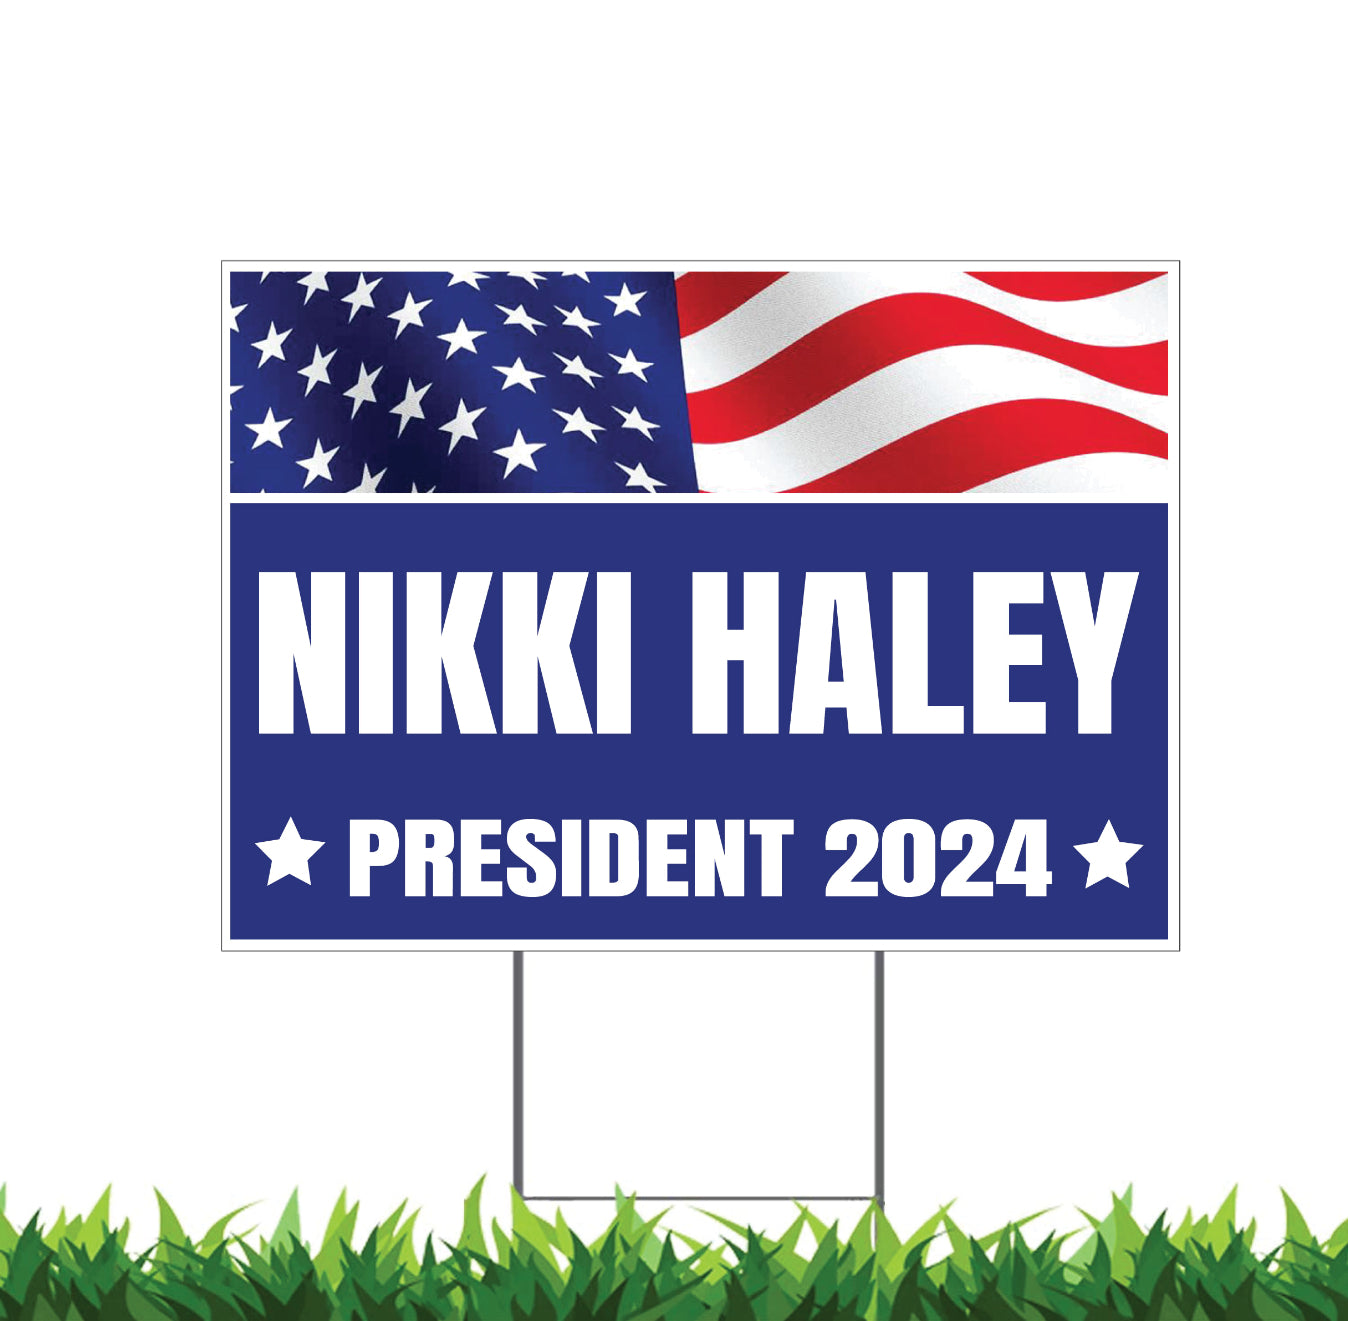 Nikki Haley for President, President 2024 Yard Sign, 18x12, 24x18, 36x24, Double Sided H-Stake Included, v1